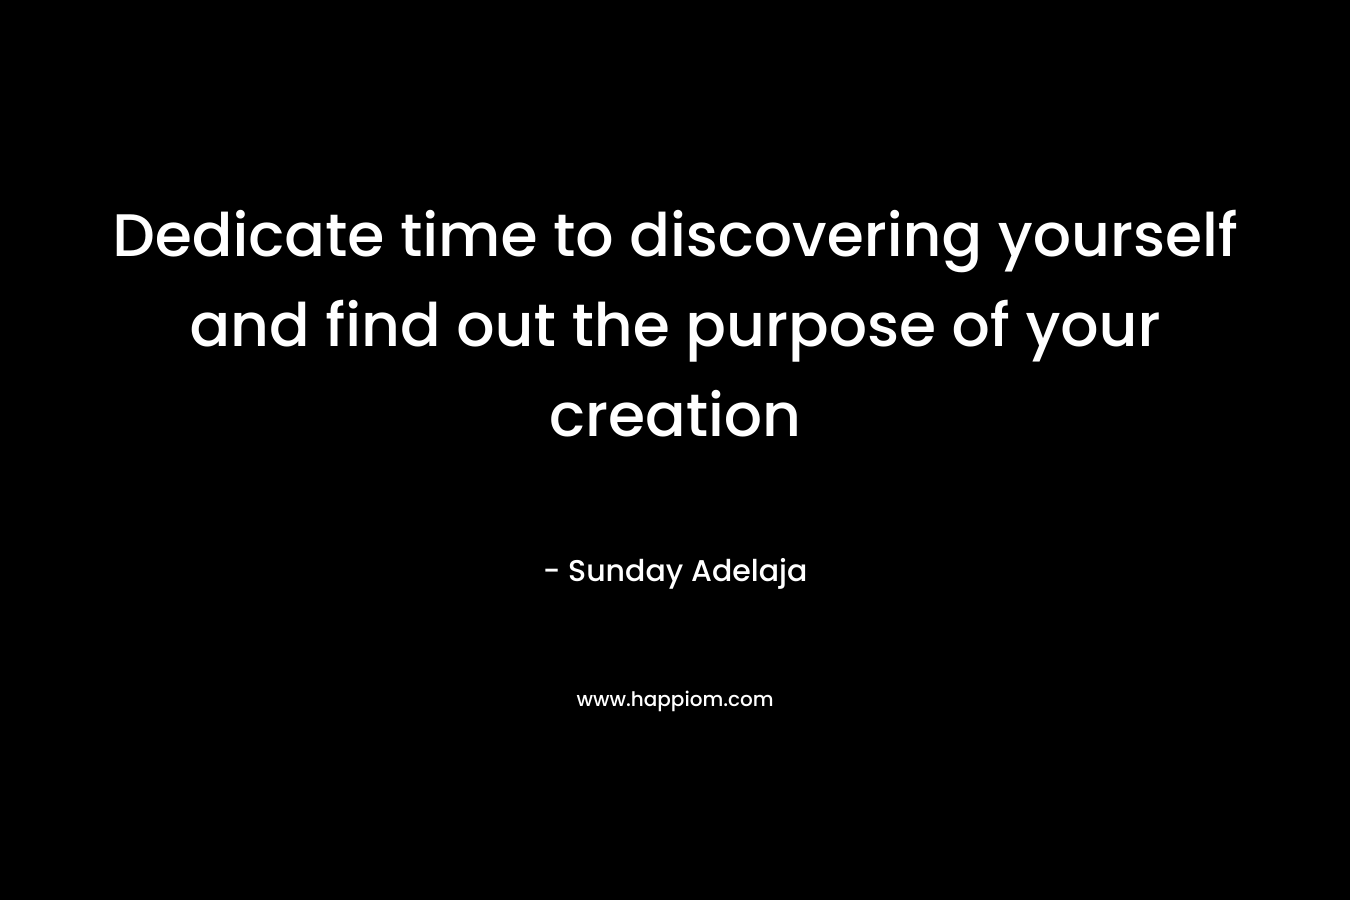 Dedicate time to discovering yourself and find out the purpose of your creation